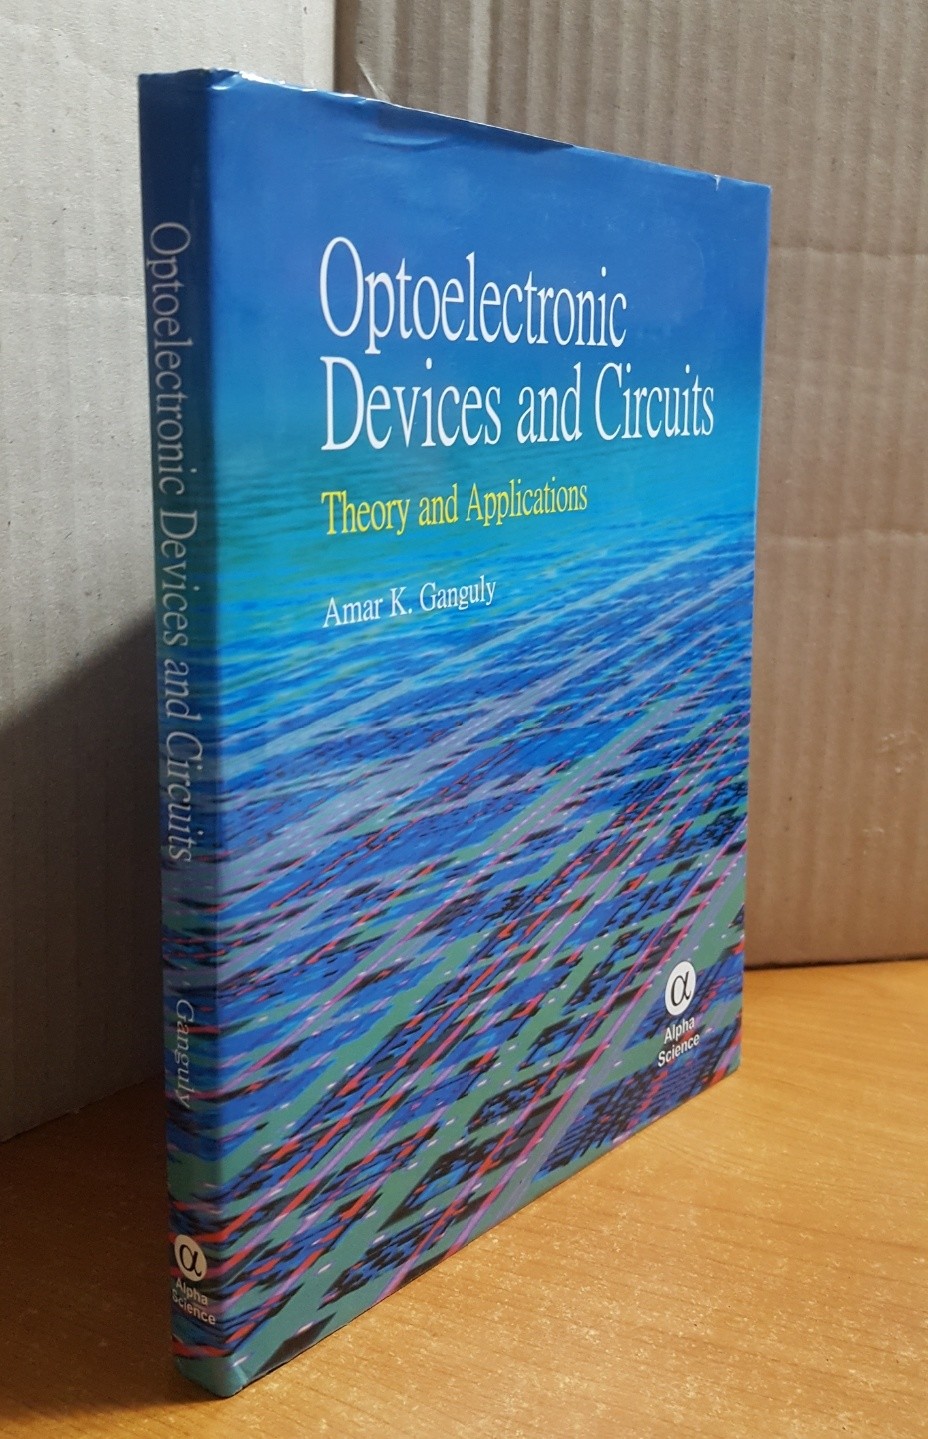 Optoelectronic Devices and Circuits